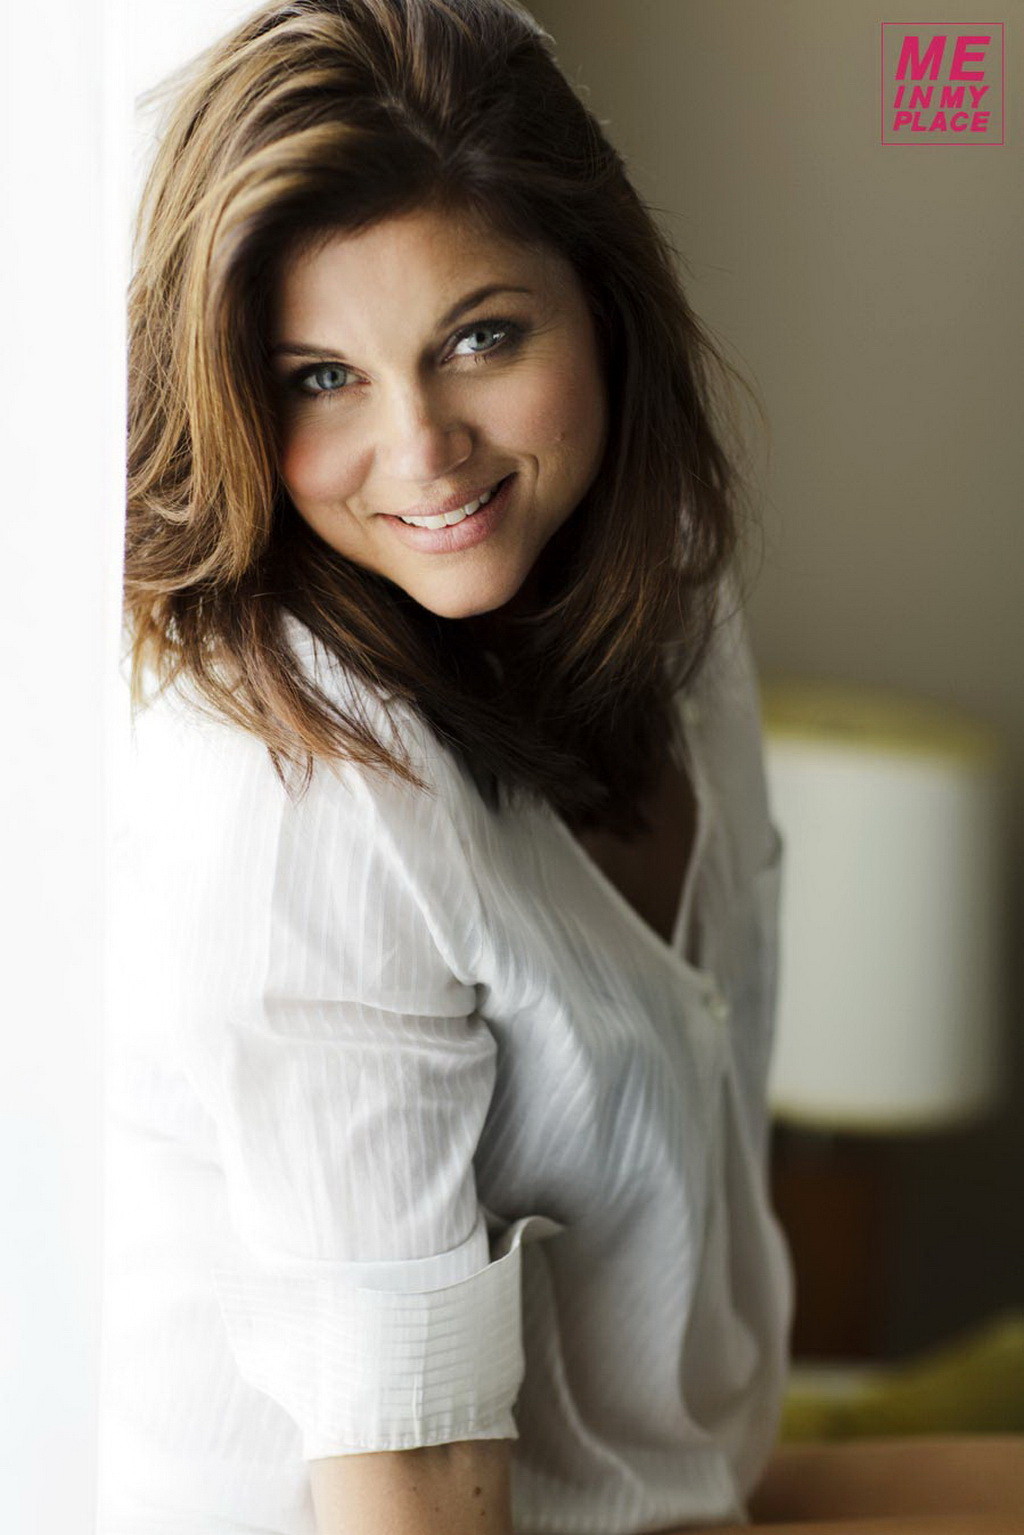 Tiffani-Amber Thiessen wearing shirts  panties for Esquire Magazine's Me in My P #75243233